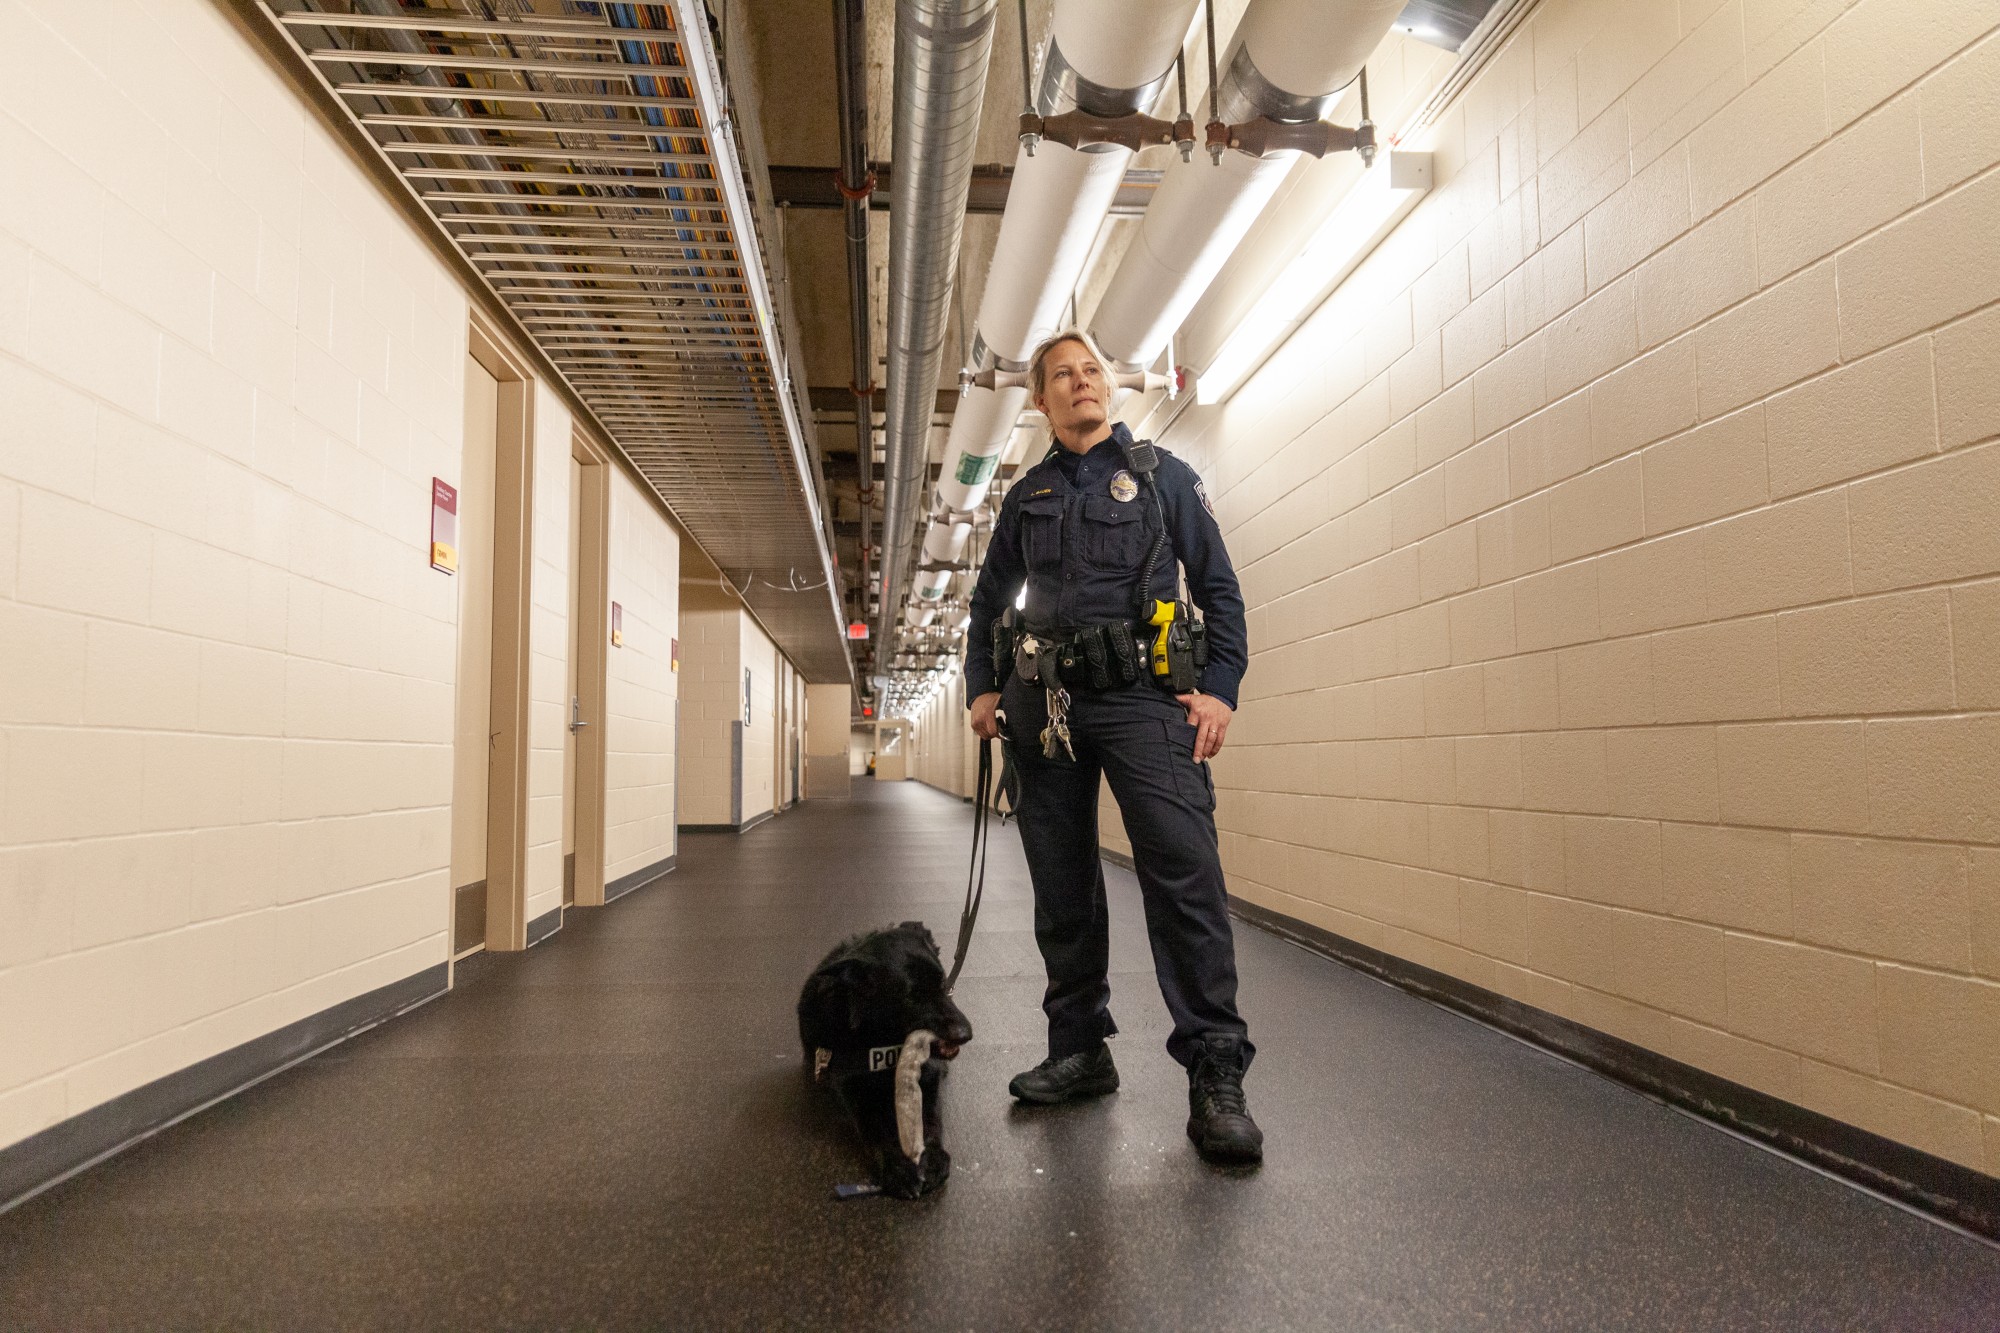 UMPD K-9 Patrol Officer Lara Bauer stands with her dual purpose canine Rio at TCF Bank Stadium on Tuesday, Feb. 25. Prior to serving as a dog handler, Bauer was a member of the Universitys mounted patrol unit, which was disbanded in 2012.